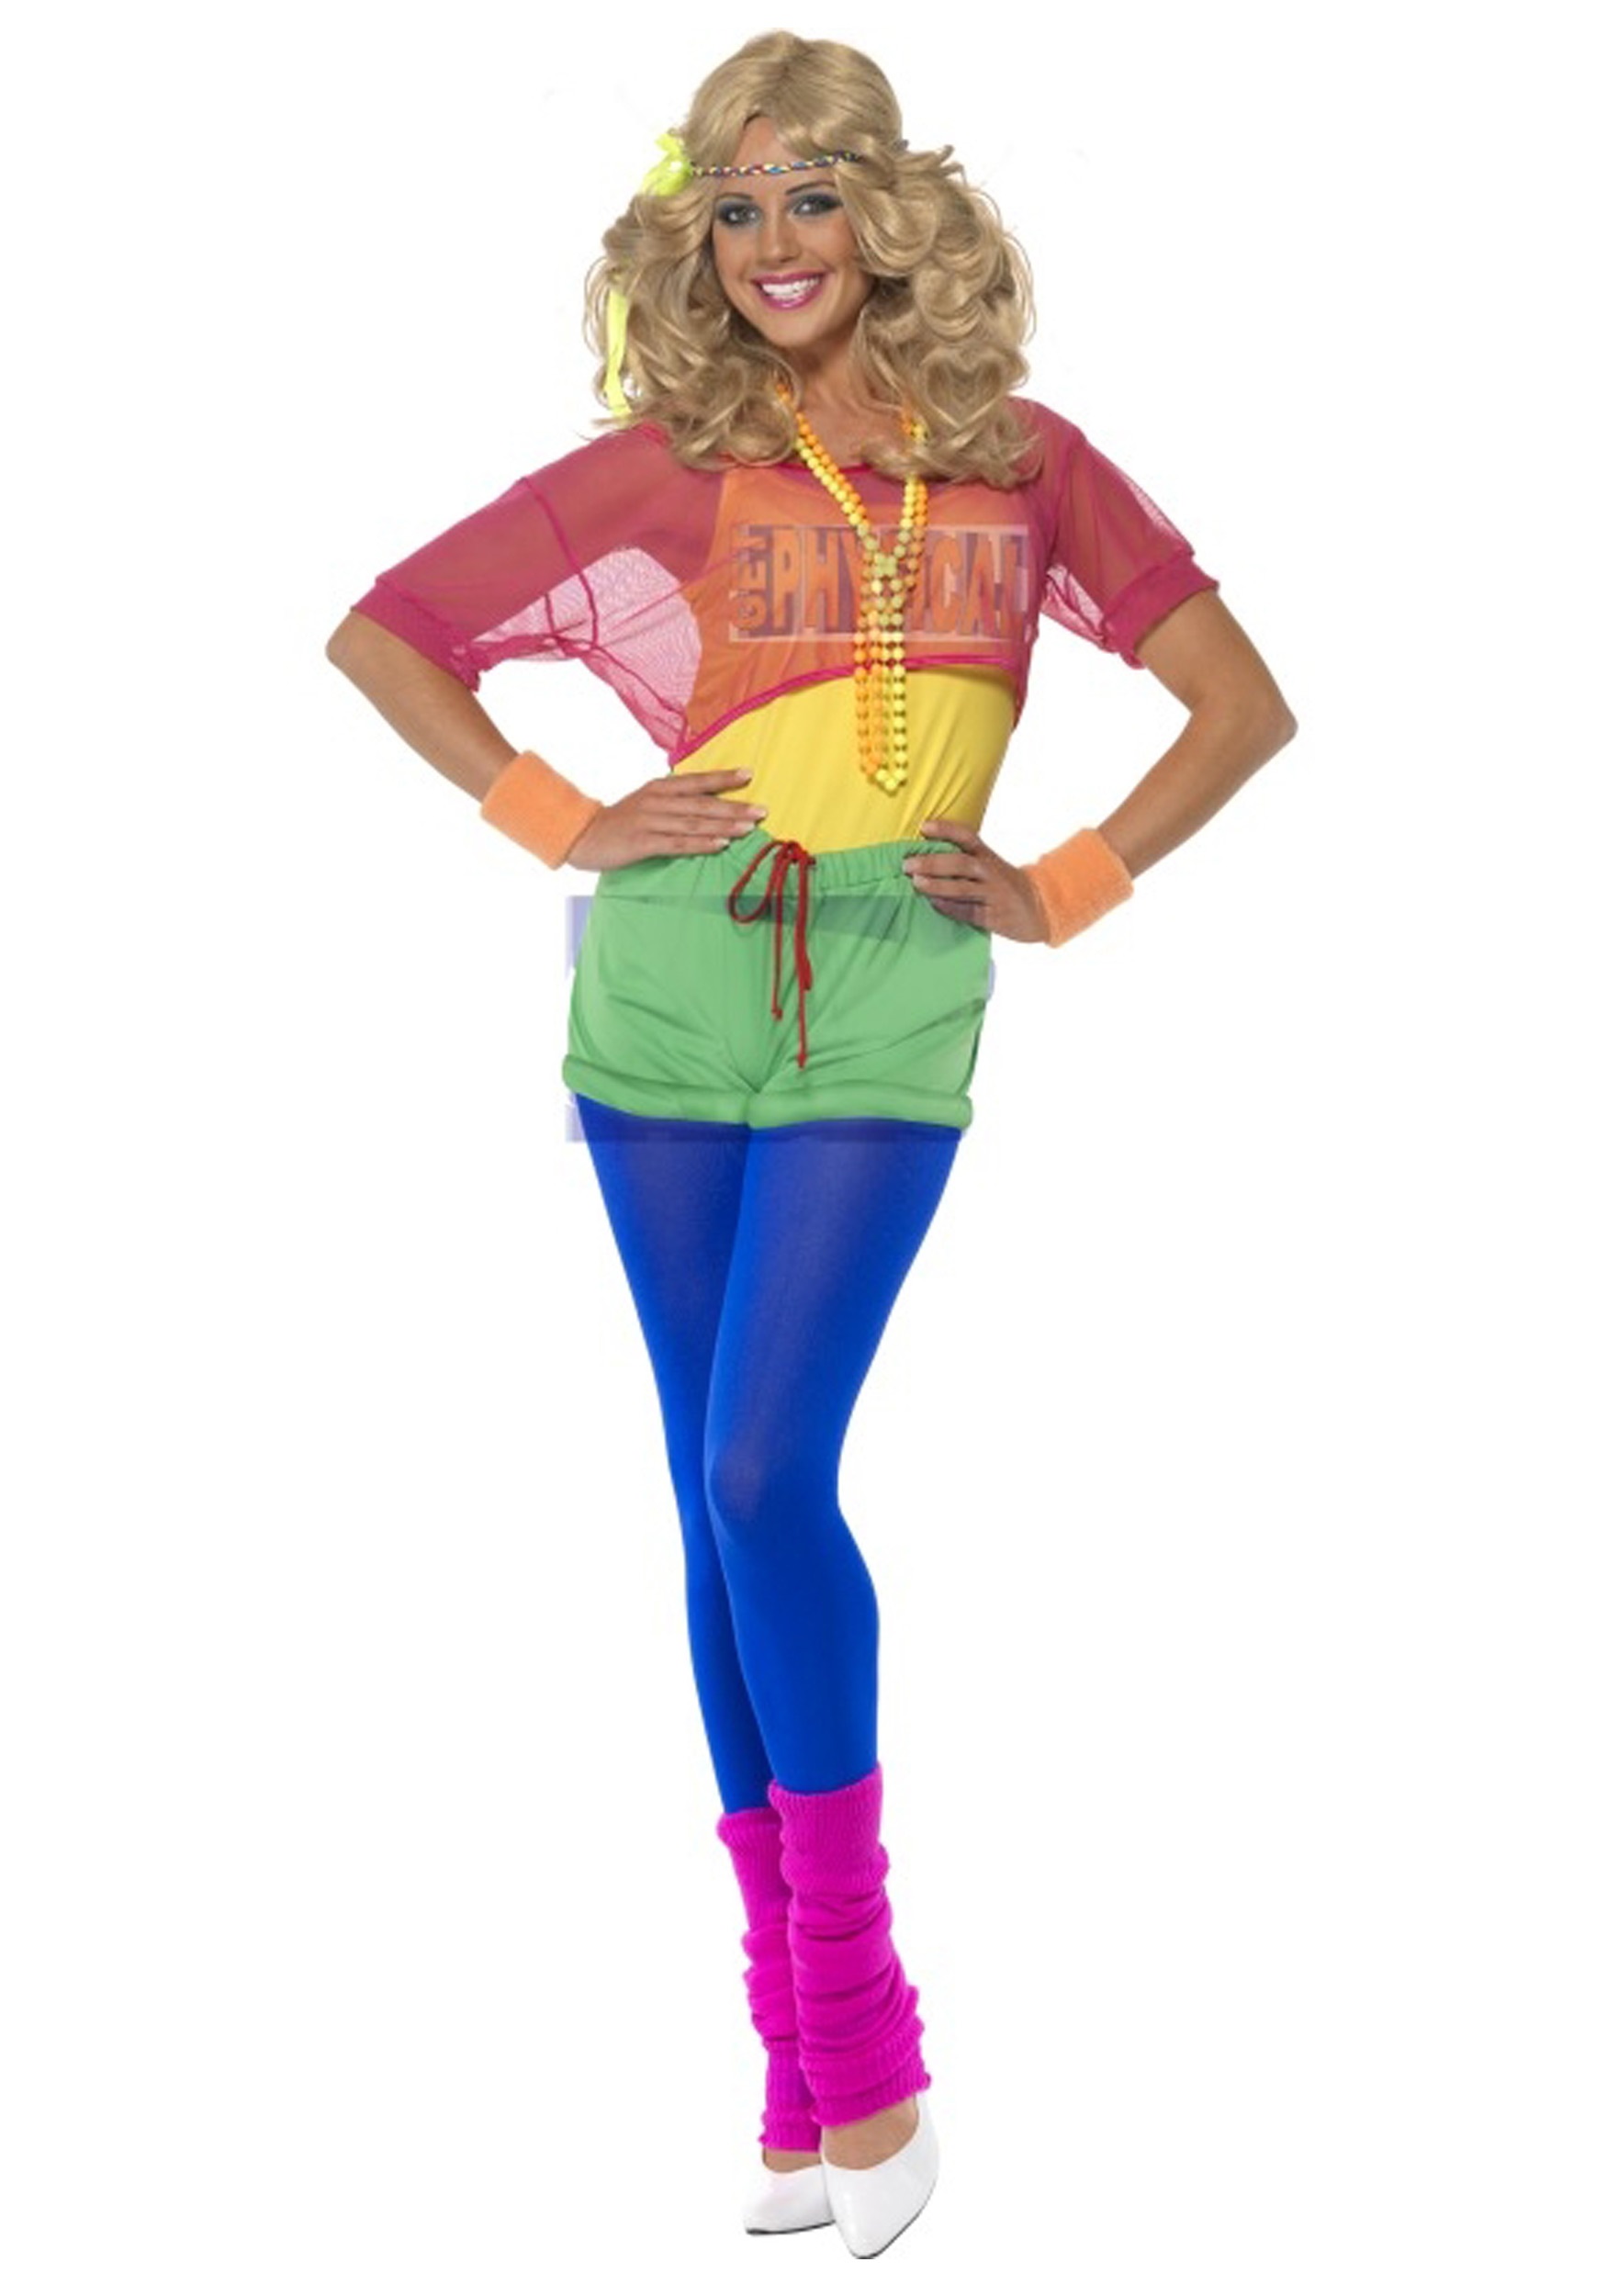 https://images.halloweencostumes.ca/products/15138/1-1/womens-80s-lets-get-physical-costume.jpg